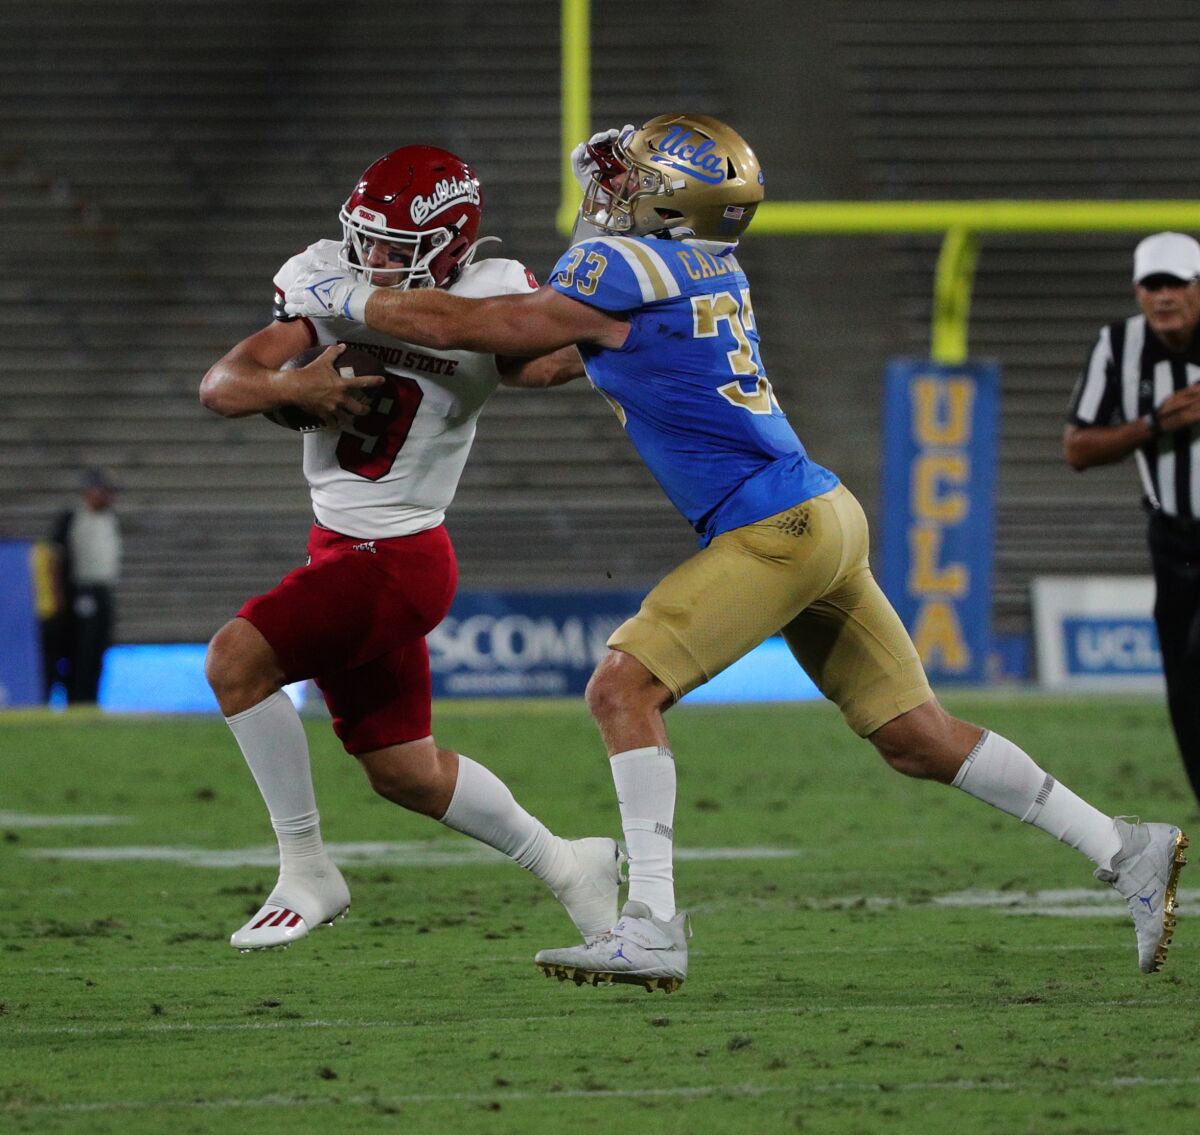 Fresno State quarterback Jake Haener extends his arm to UCLA linebacker Bo Calvert as he scampers for extra yardage.